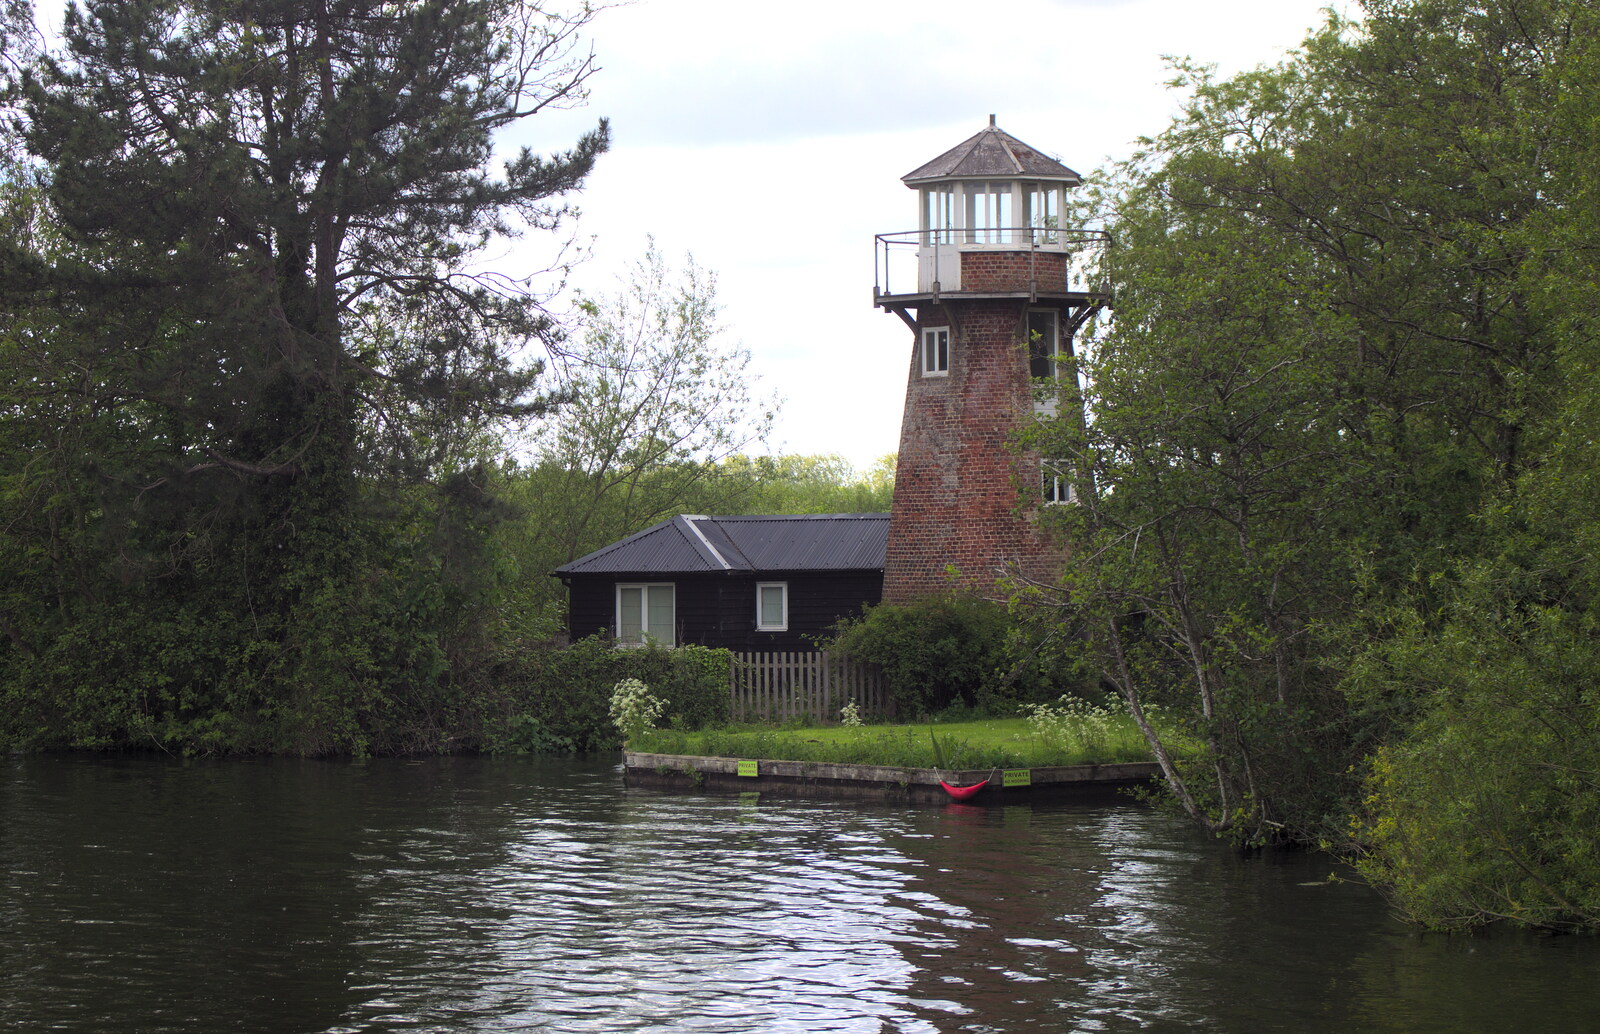 A converted wind pump from A Trip on the Norfolk Broads, Wroxham, Norfolk - 25th May 2013